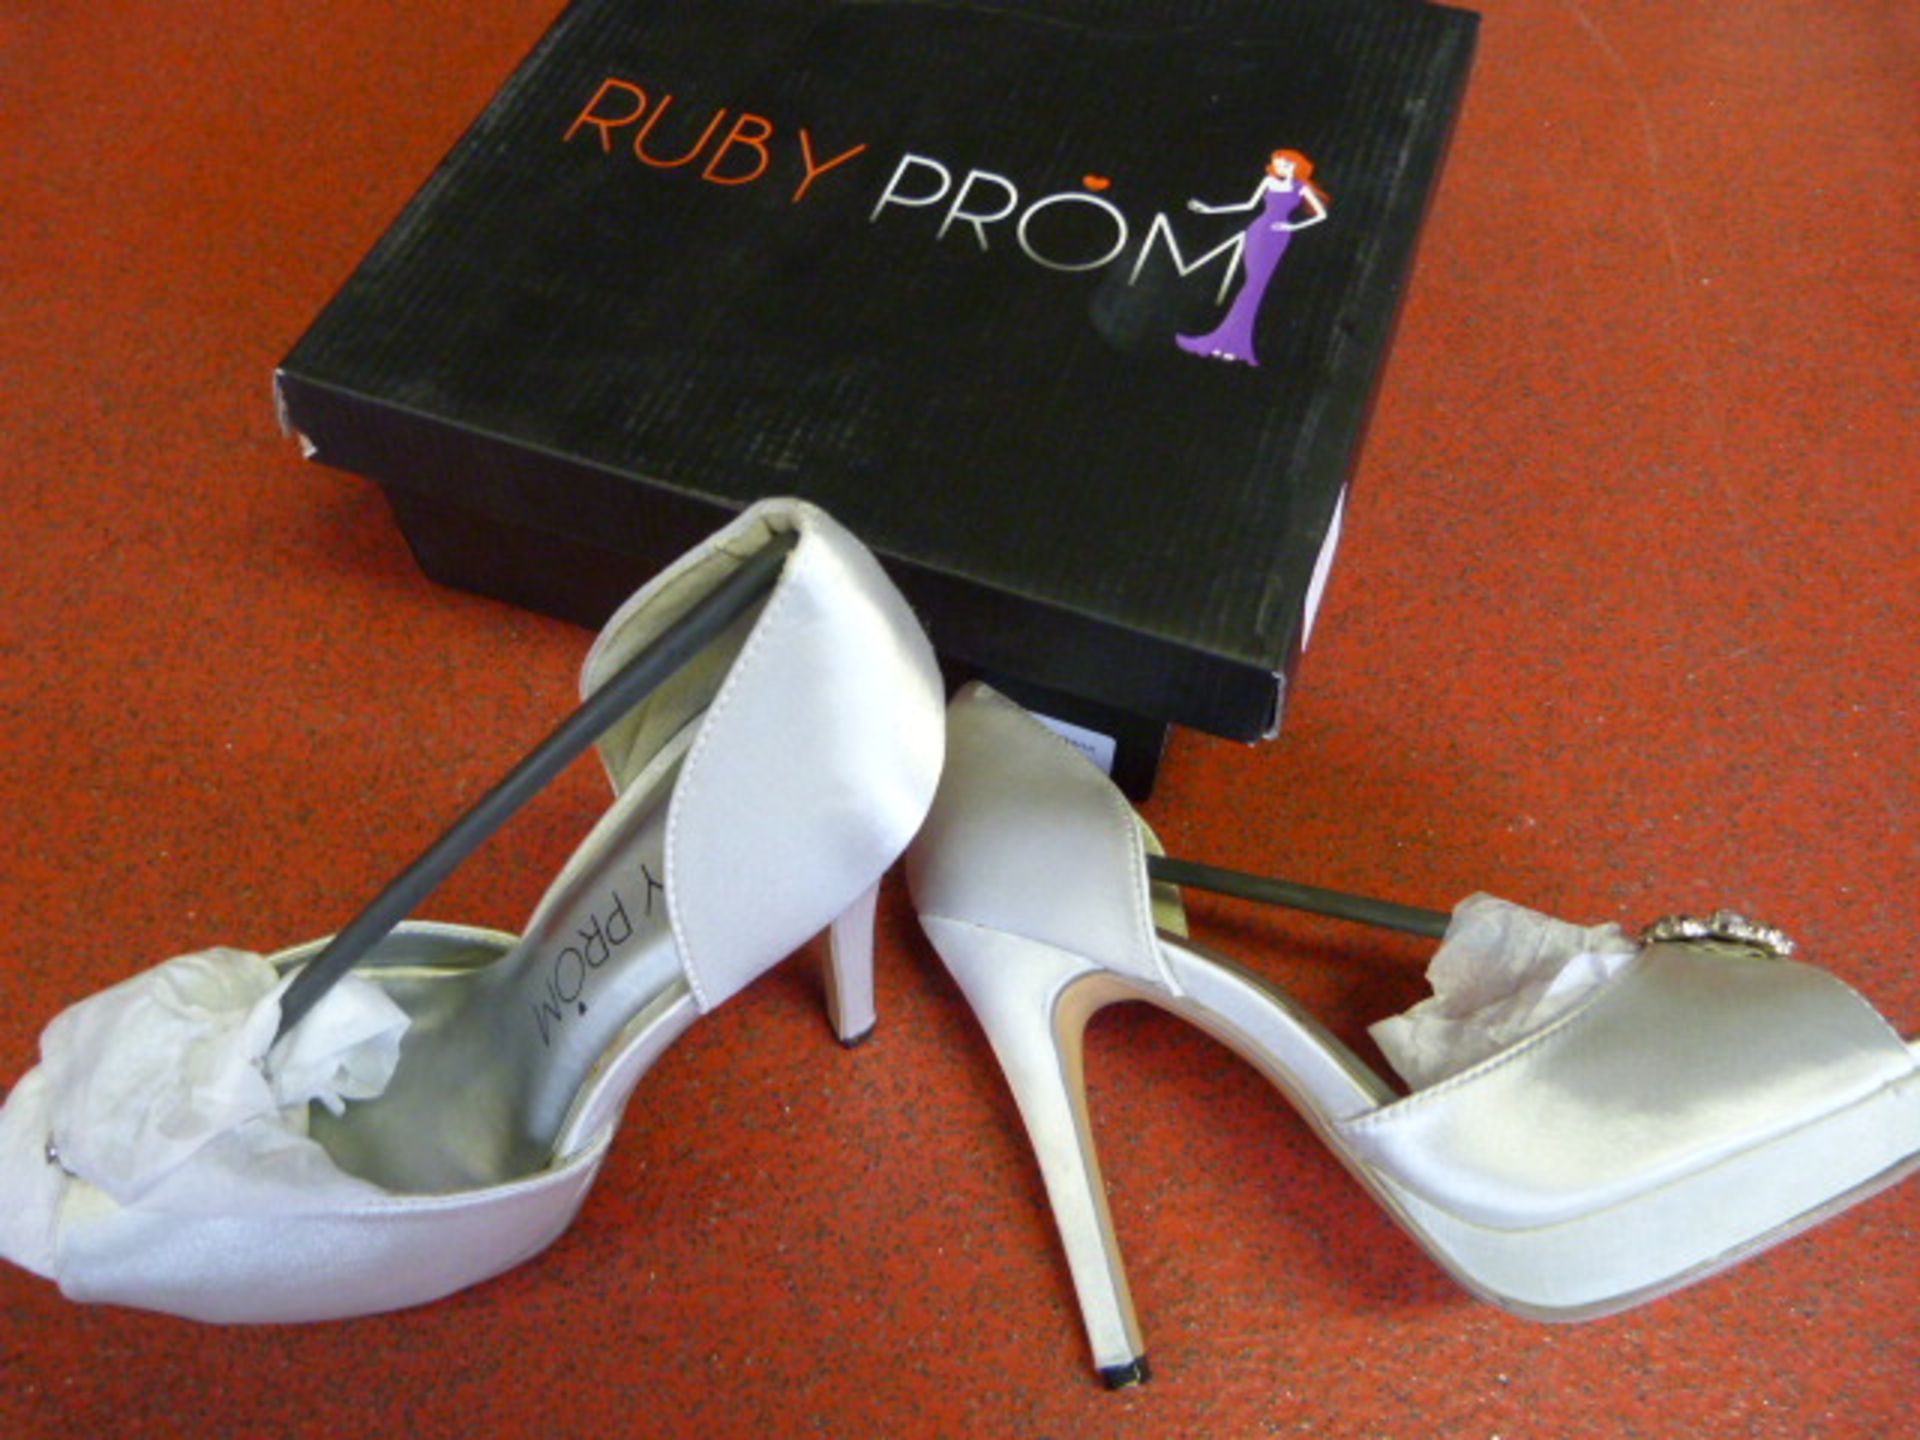 *Six Pairs of Ruby Prom RU02 Silver Prom Shoes (Mi